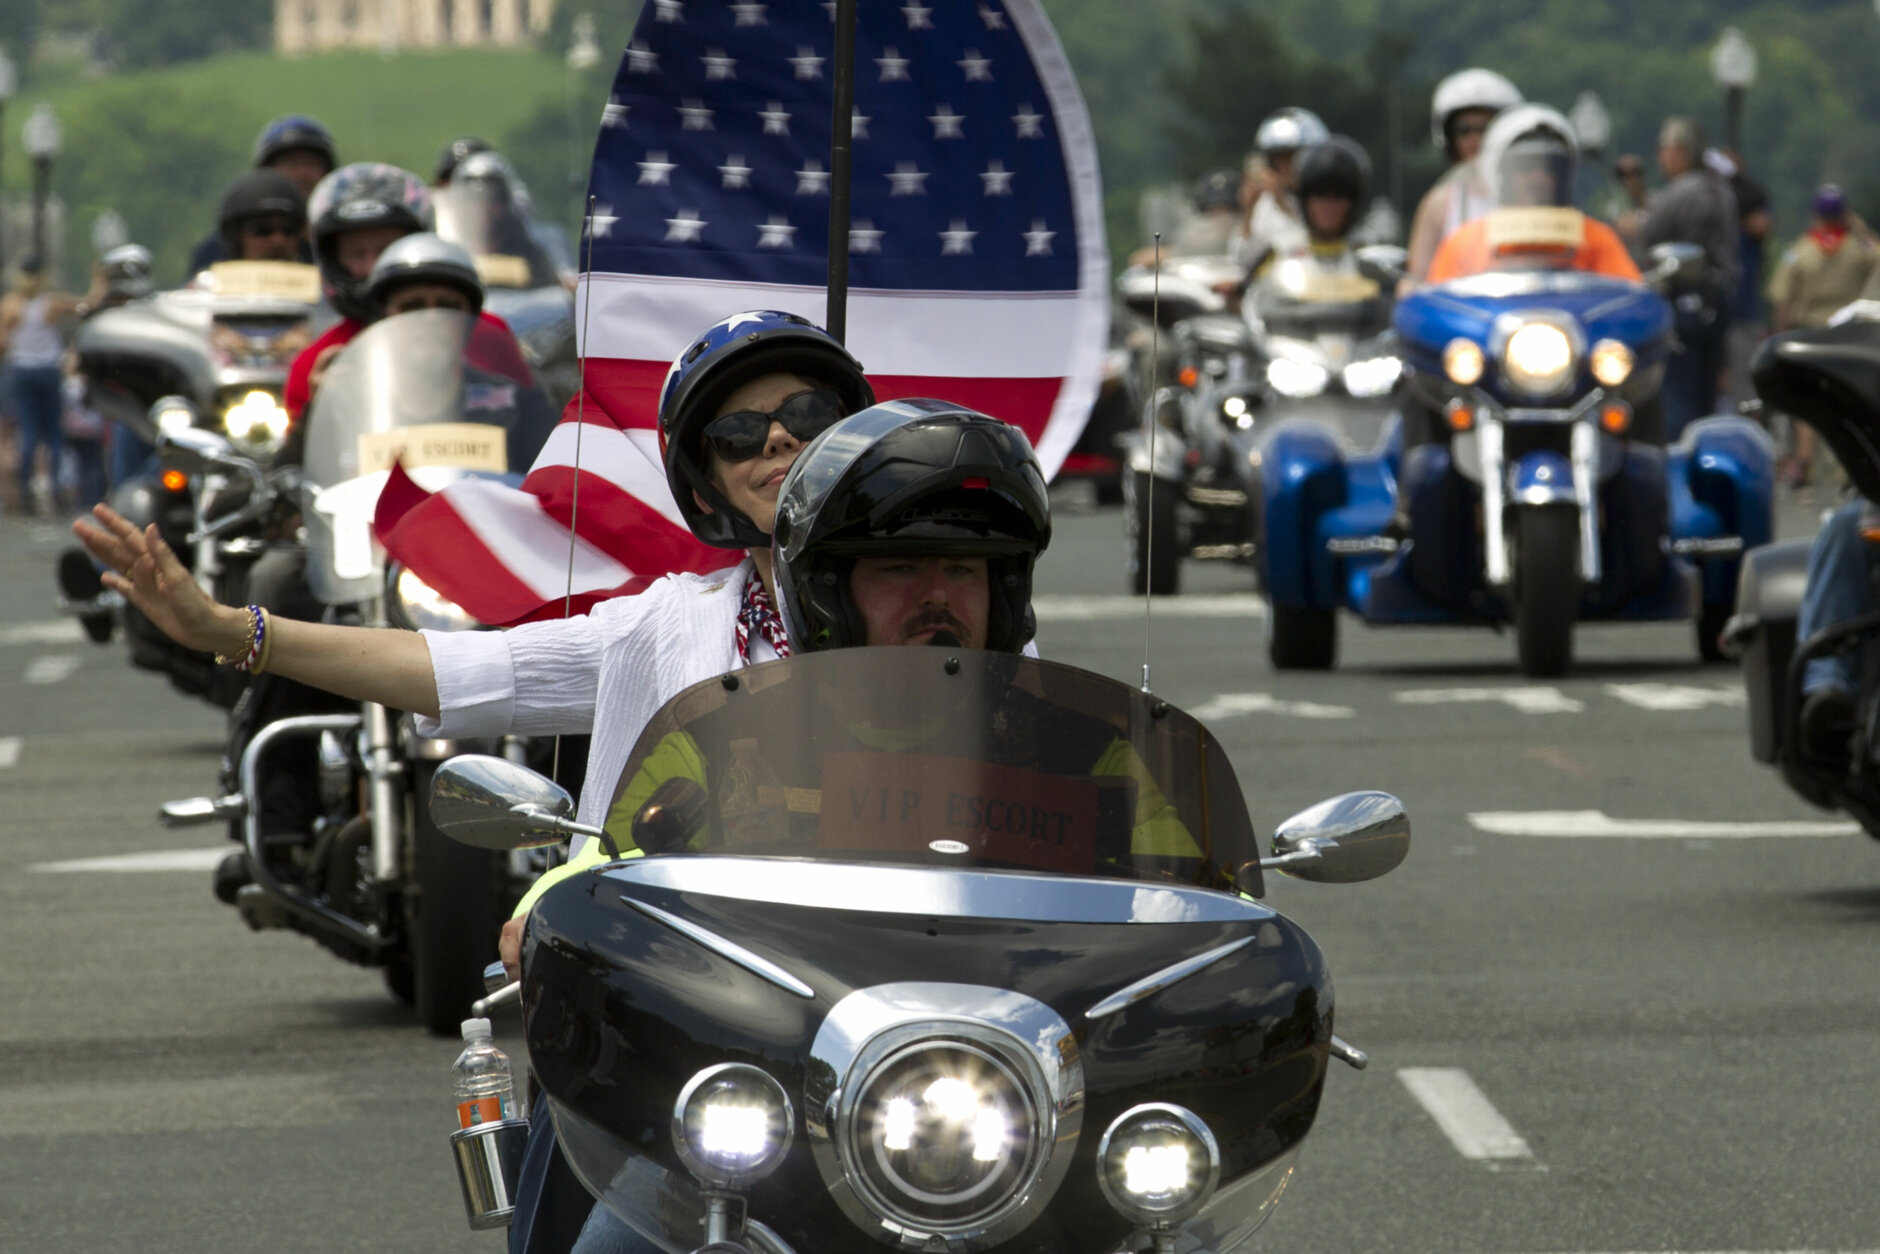 Participants in the Rolling Thunder motorcycle rally waves to the crowds as they ride past Arlington Memorial Bridge, during the annual Rolling Thunder parade, ahead of Memorial Day on Sunday, May 27, 2018, in Washington. (AP Photo/Jose Luis Magana)